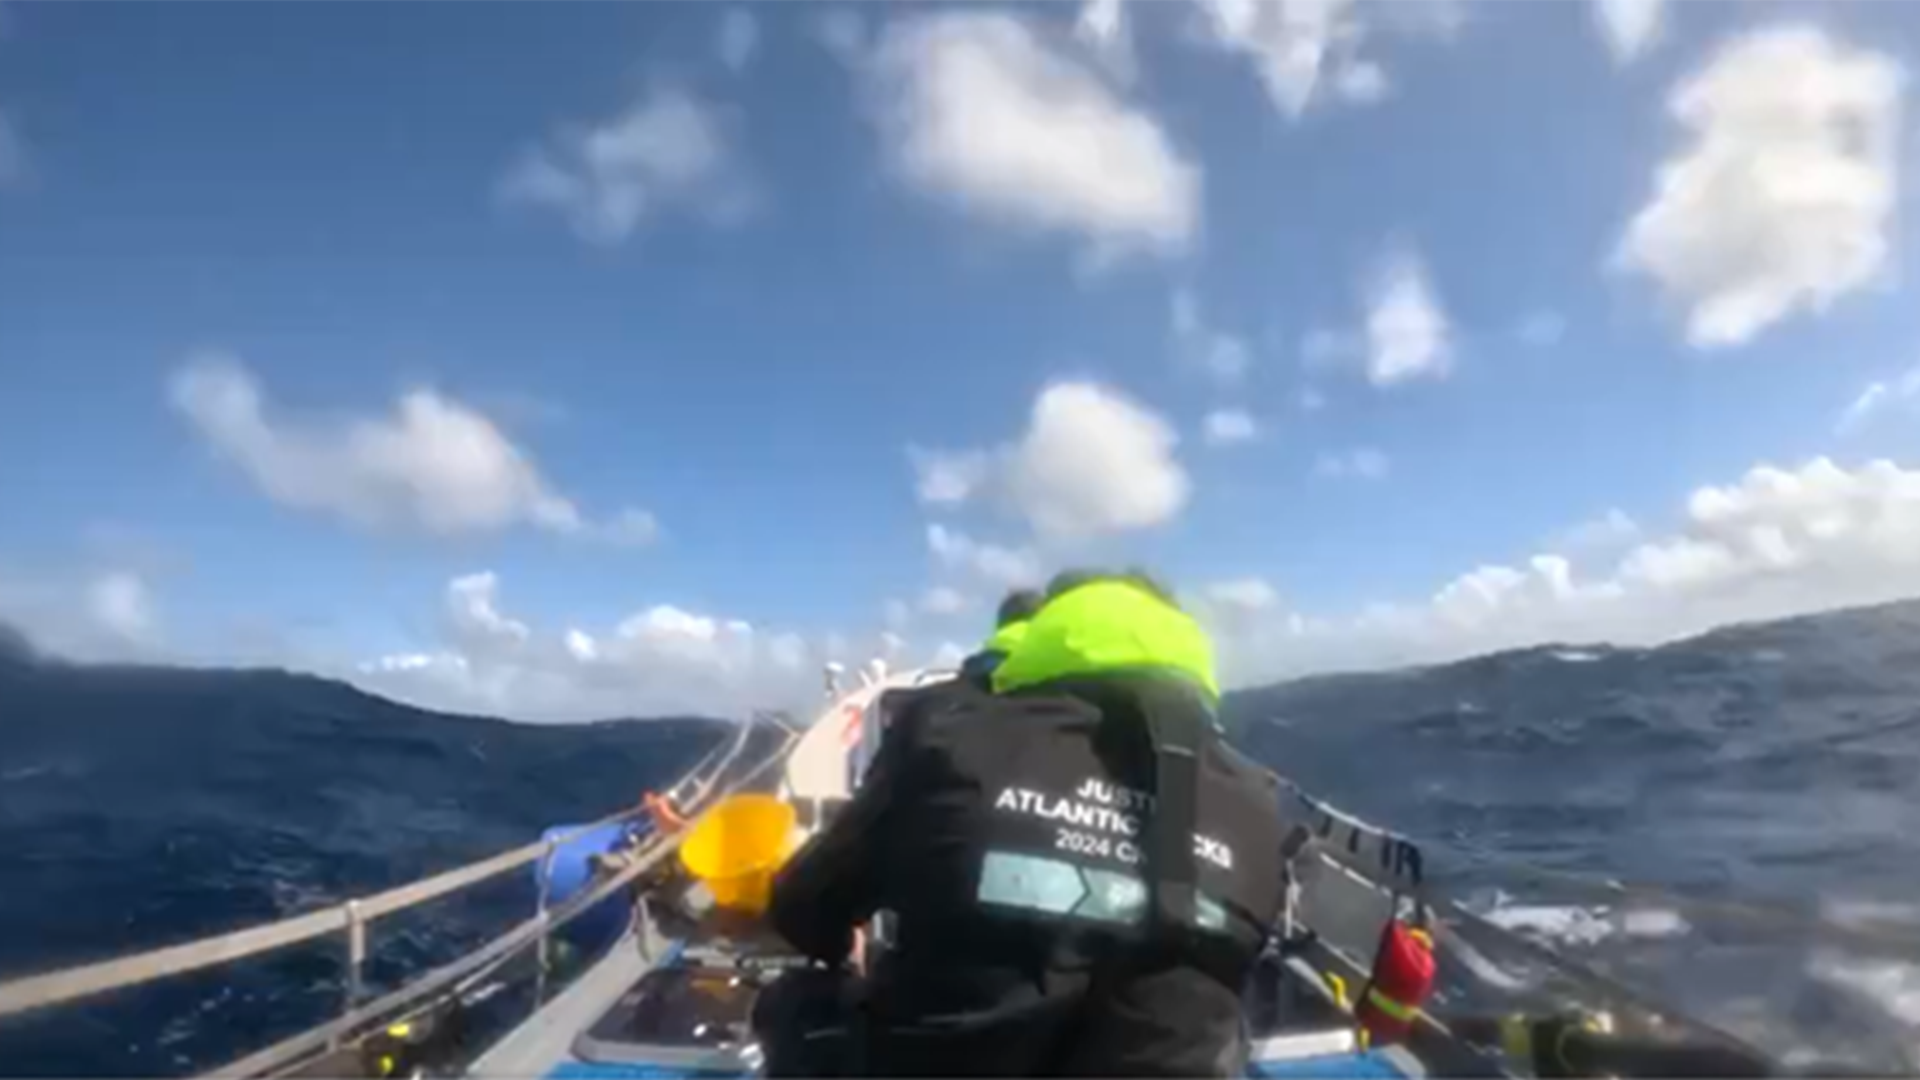 First person photo taken from in the boat of the crew rowing.